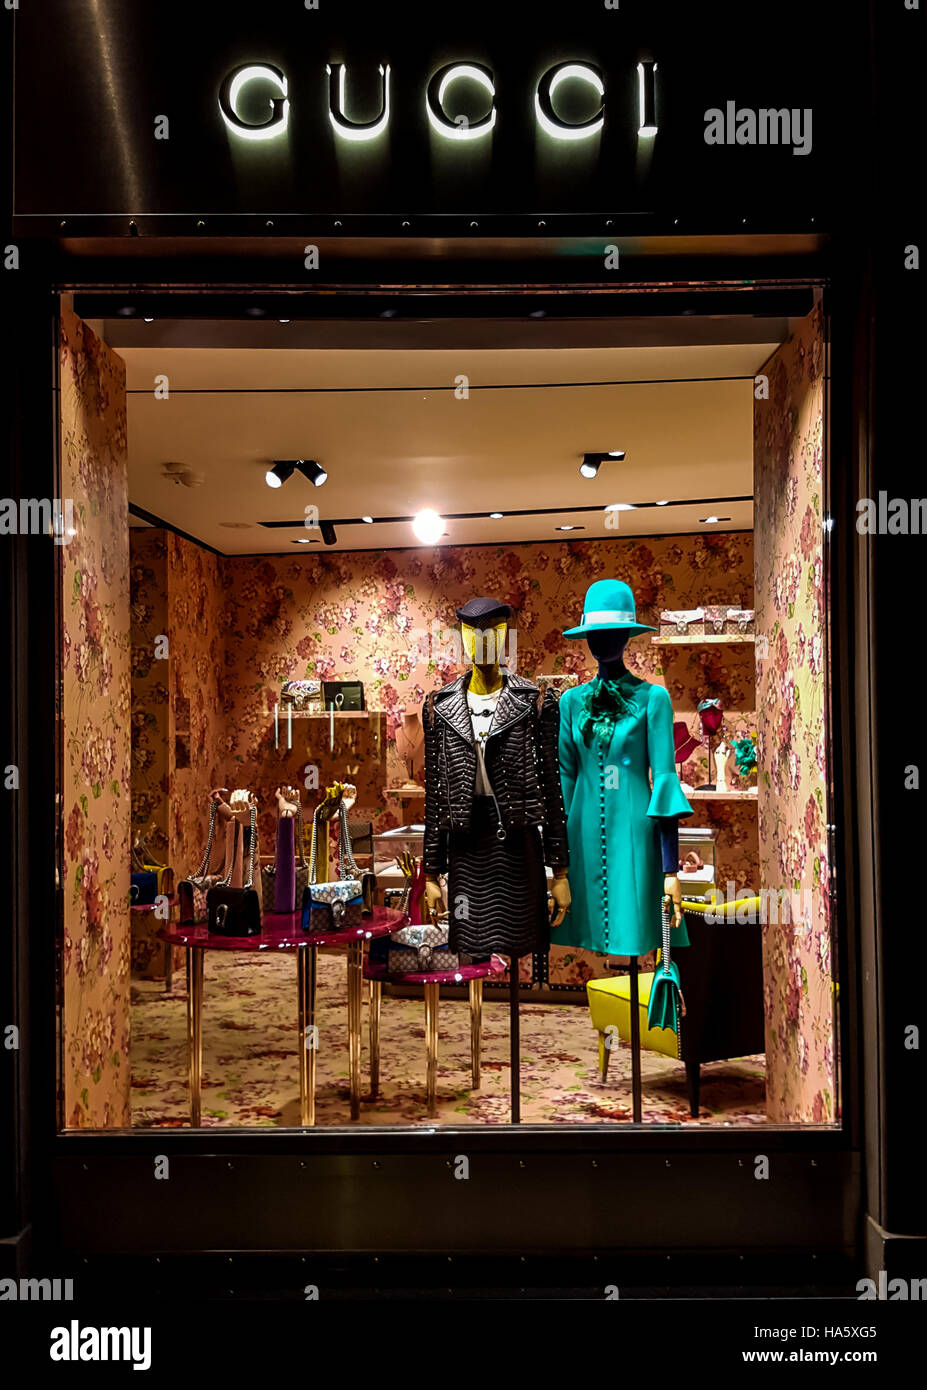 Gucci luxury bags, clothes and shoes sit displayed for sale inside a Gucci store in Italy Stock Photo -